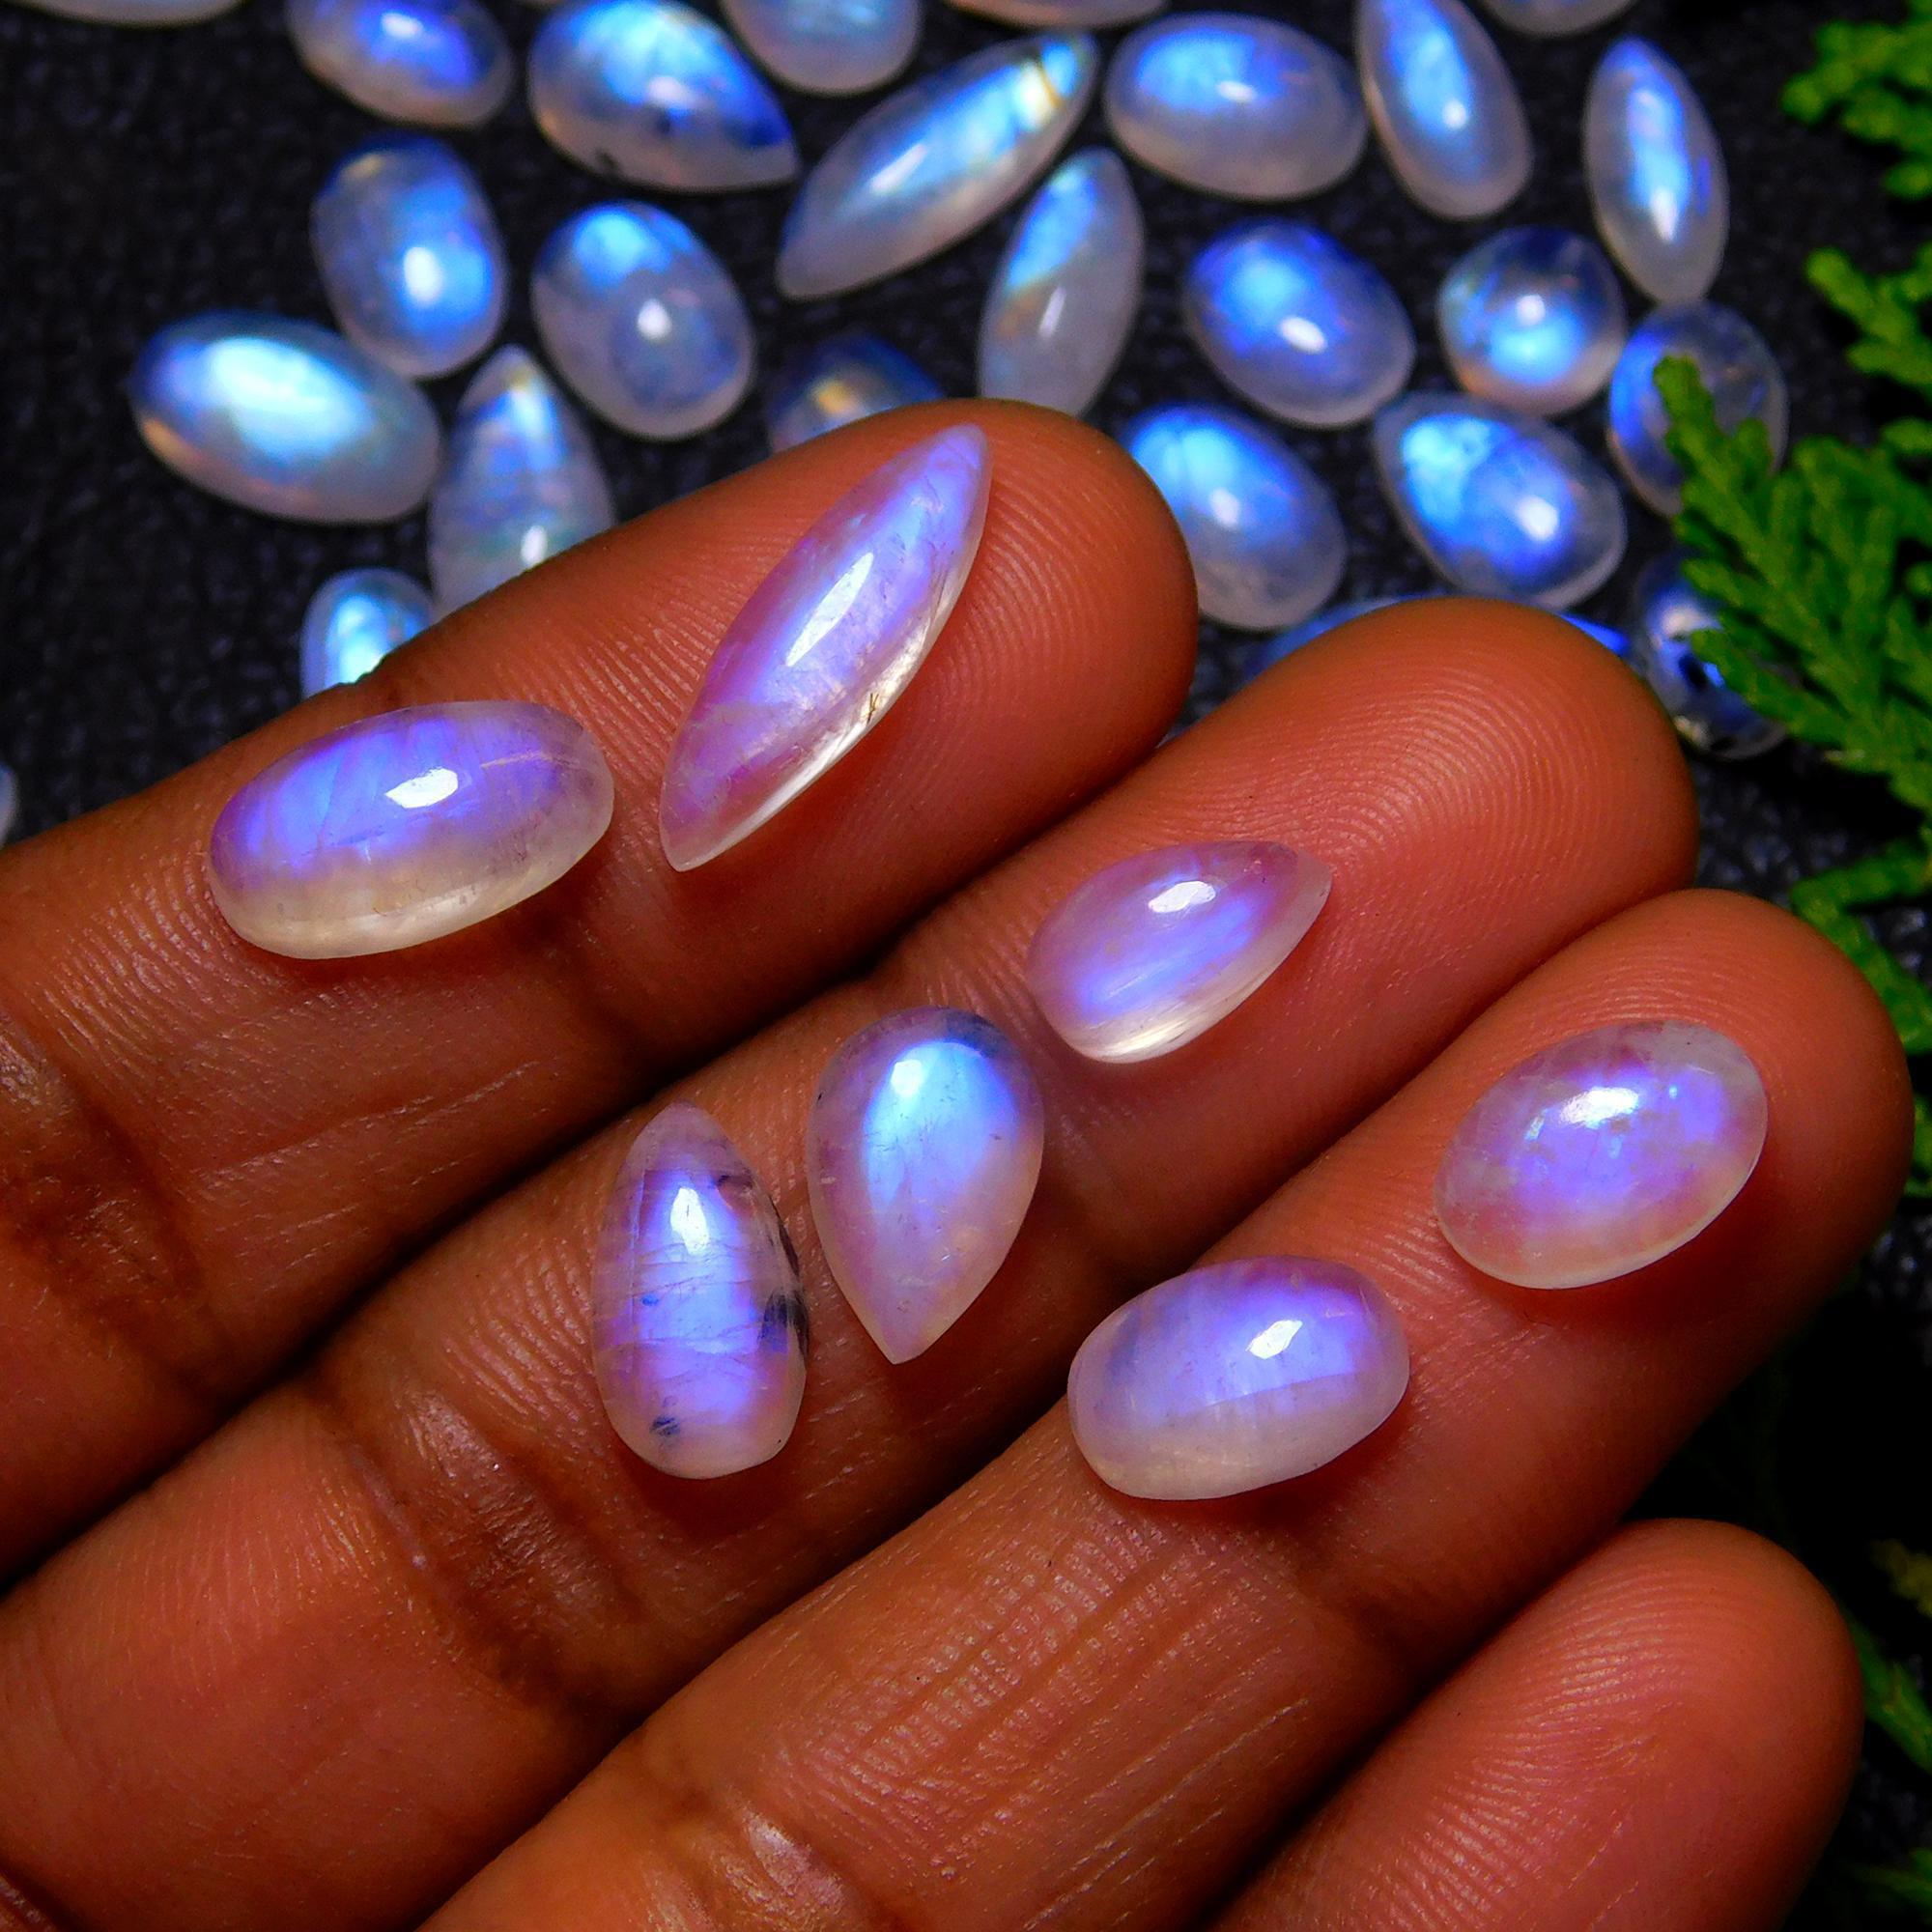 68Pcs 132Cts Natural Rainbow Moonstone Cabochon Blue Fire Loose Gemstone Crystal jewelry supplies wholesale lot gift for her Black Friday 15X5 6X4mm#9433